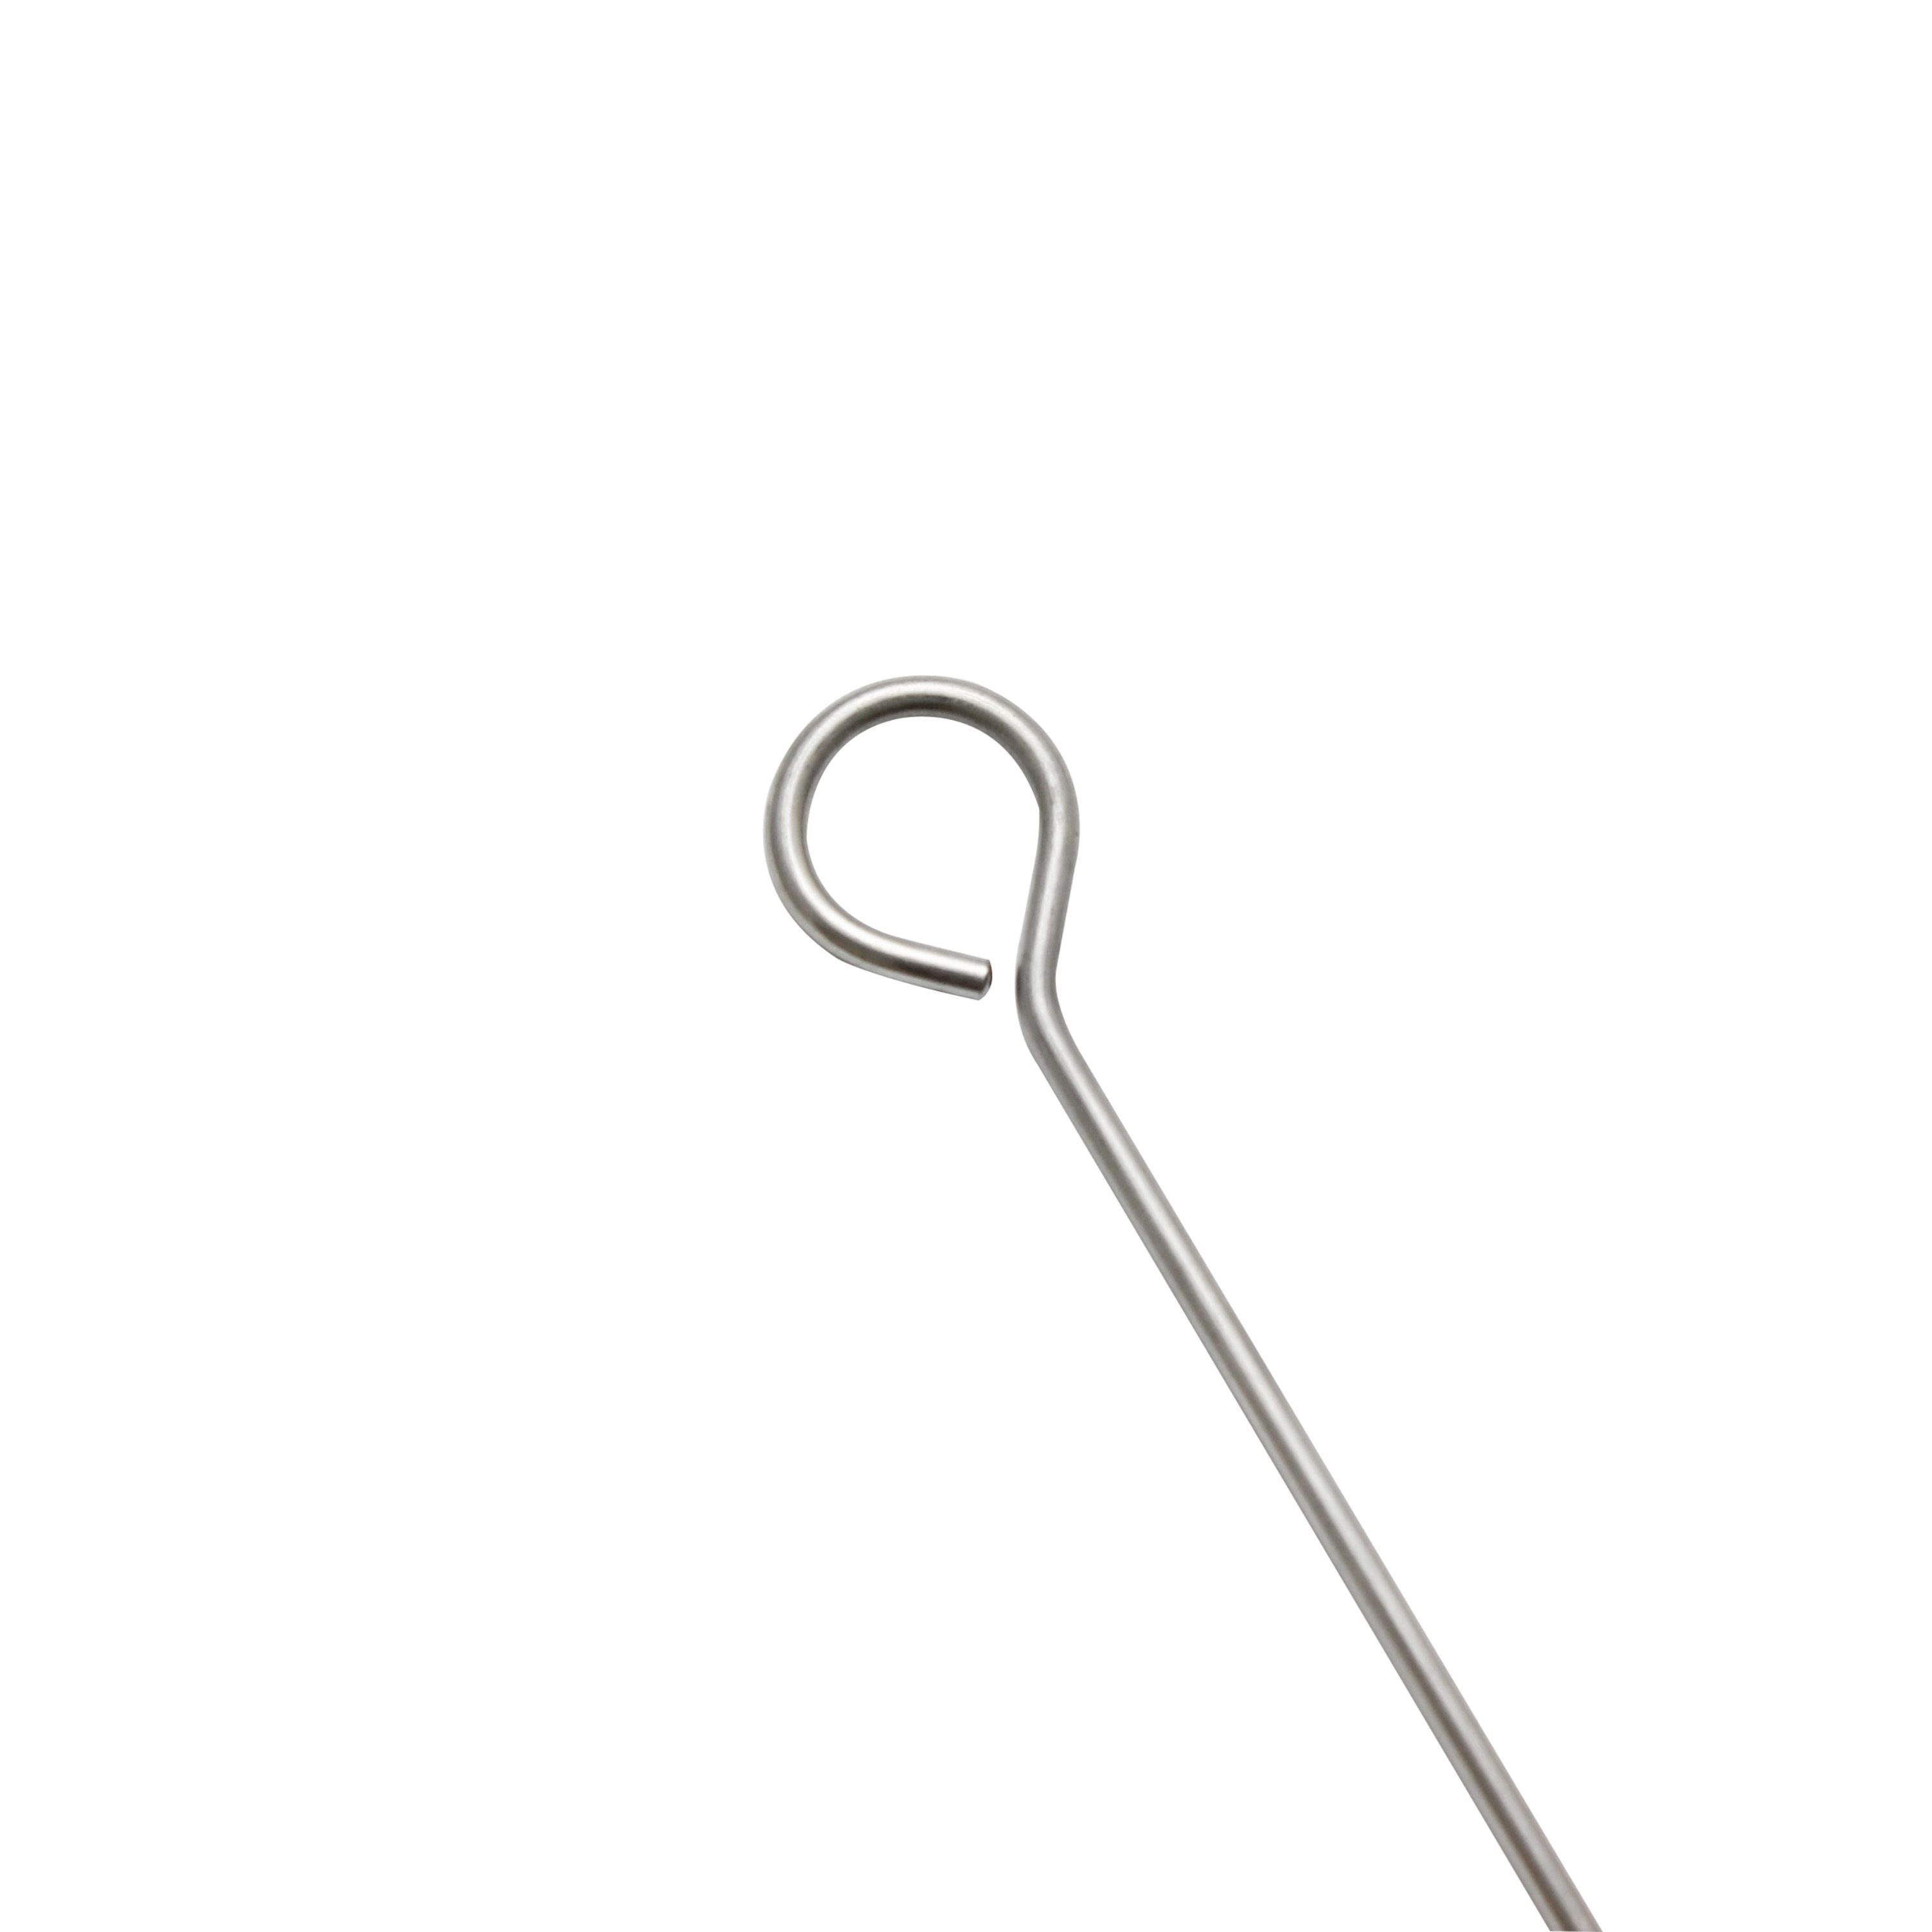 Thunder Group Stainless Steel Round Skewers - 48/Pack